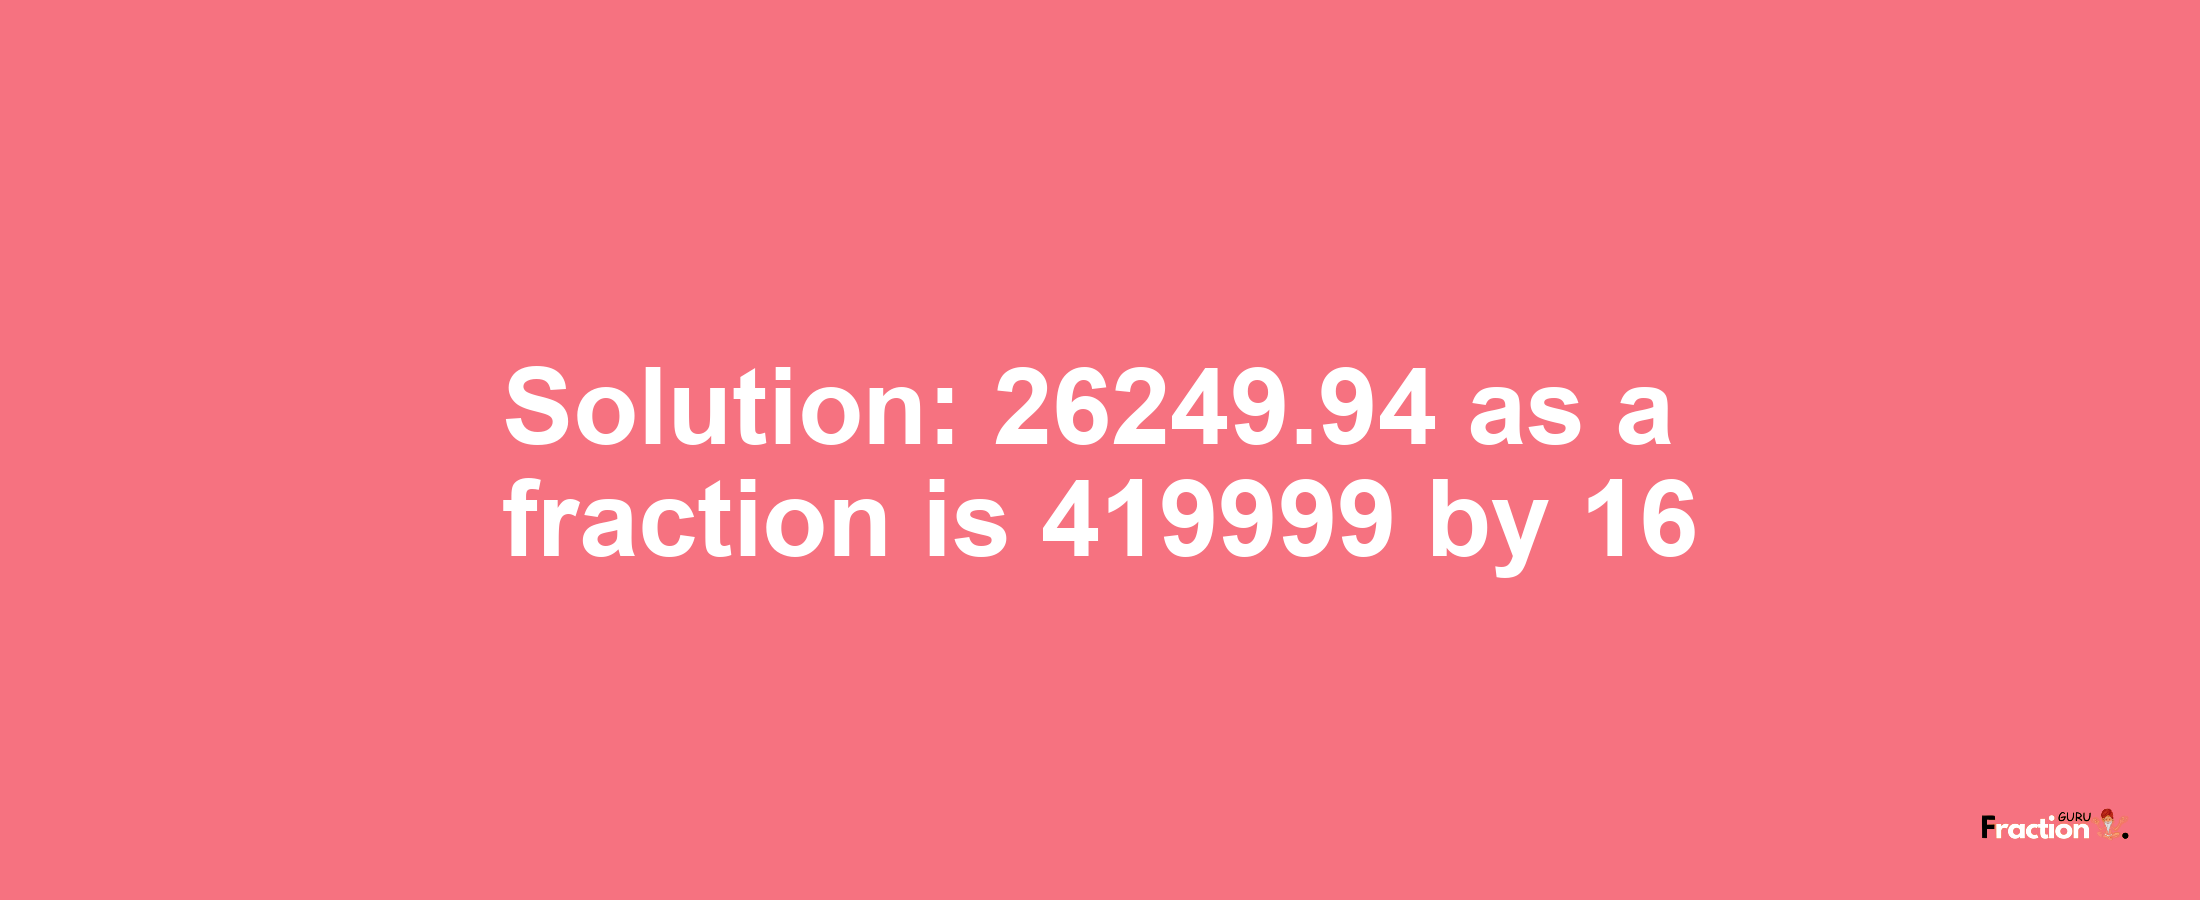 Solution:26249.94 as a fraction is 419999/16